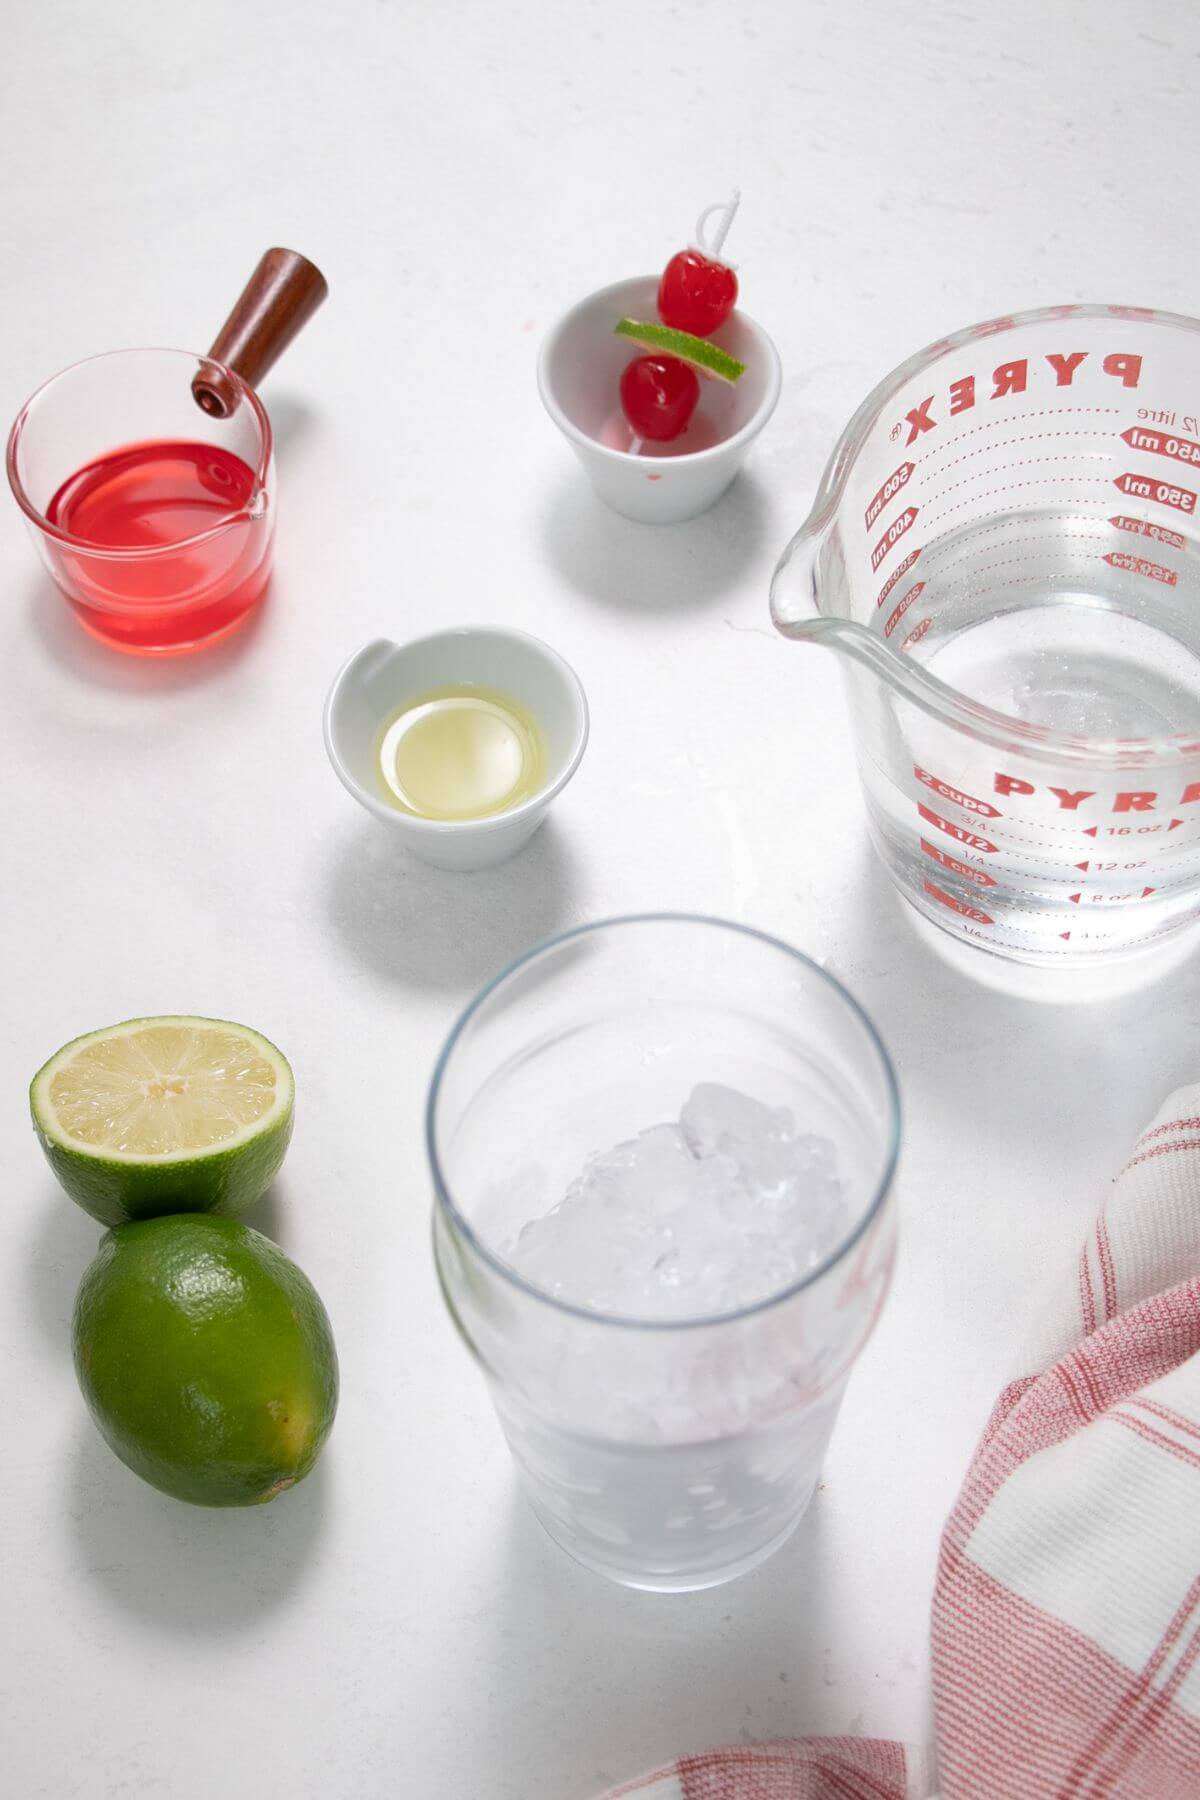 Ingredients for cherry limeade recipe.